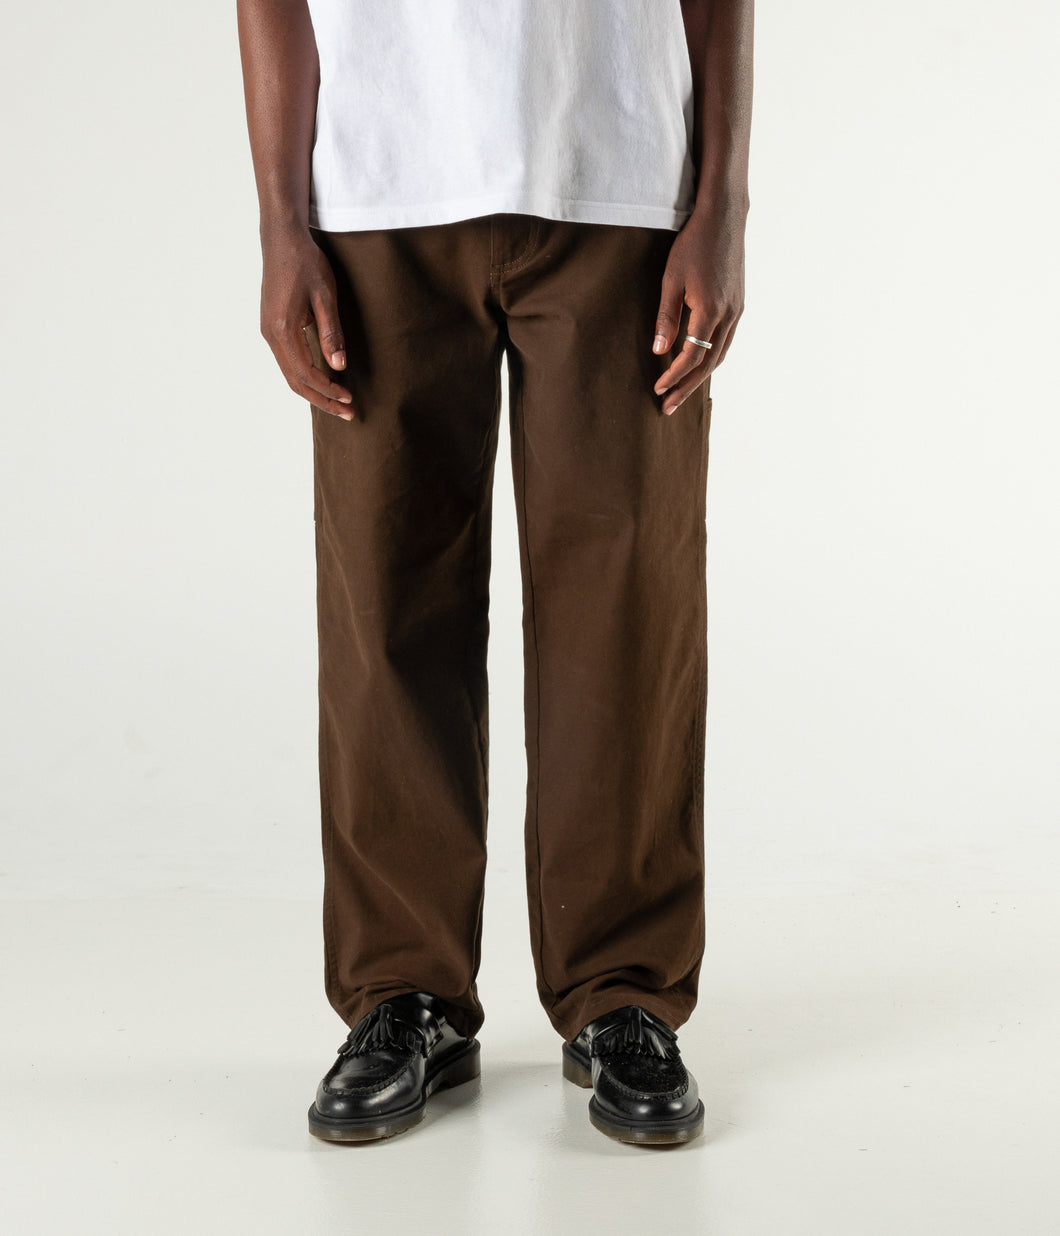 Former - Distend VT Pant in Brown